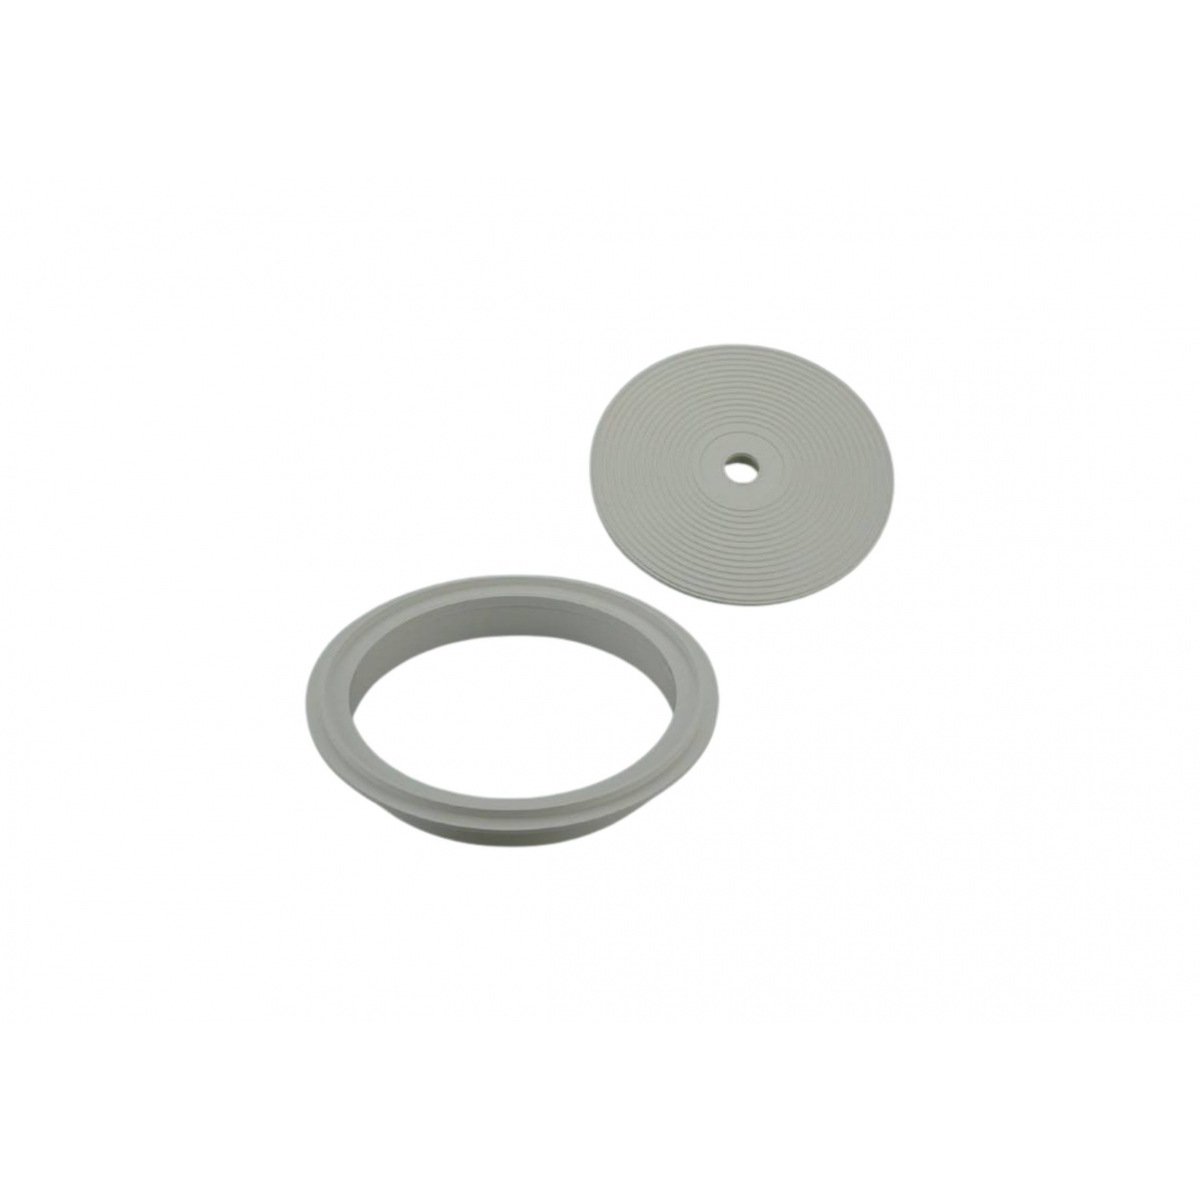 CIRCULAR COVER AND RING SKIMMER